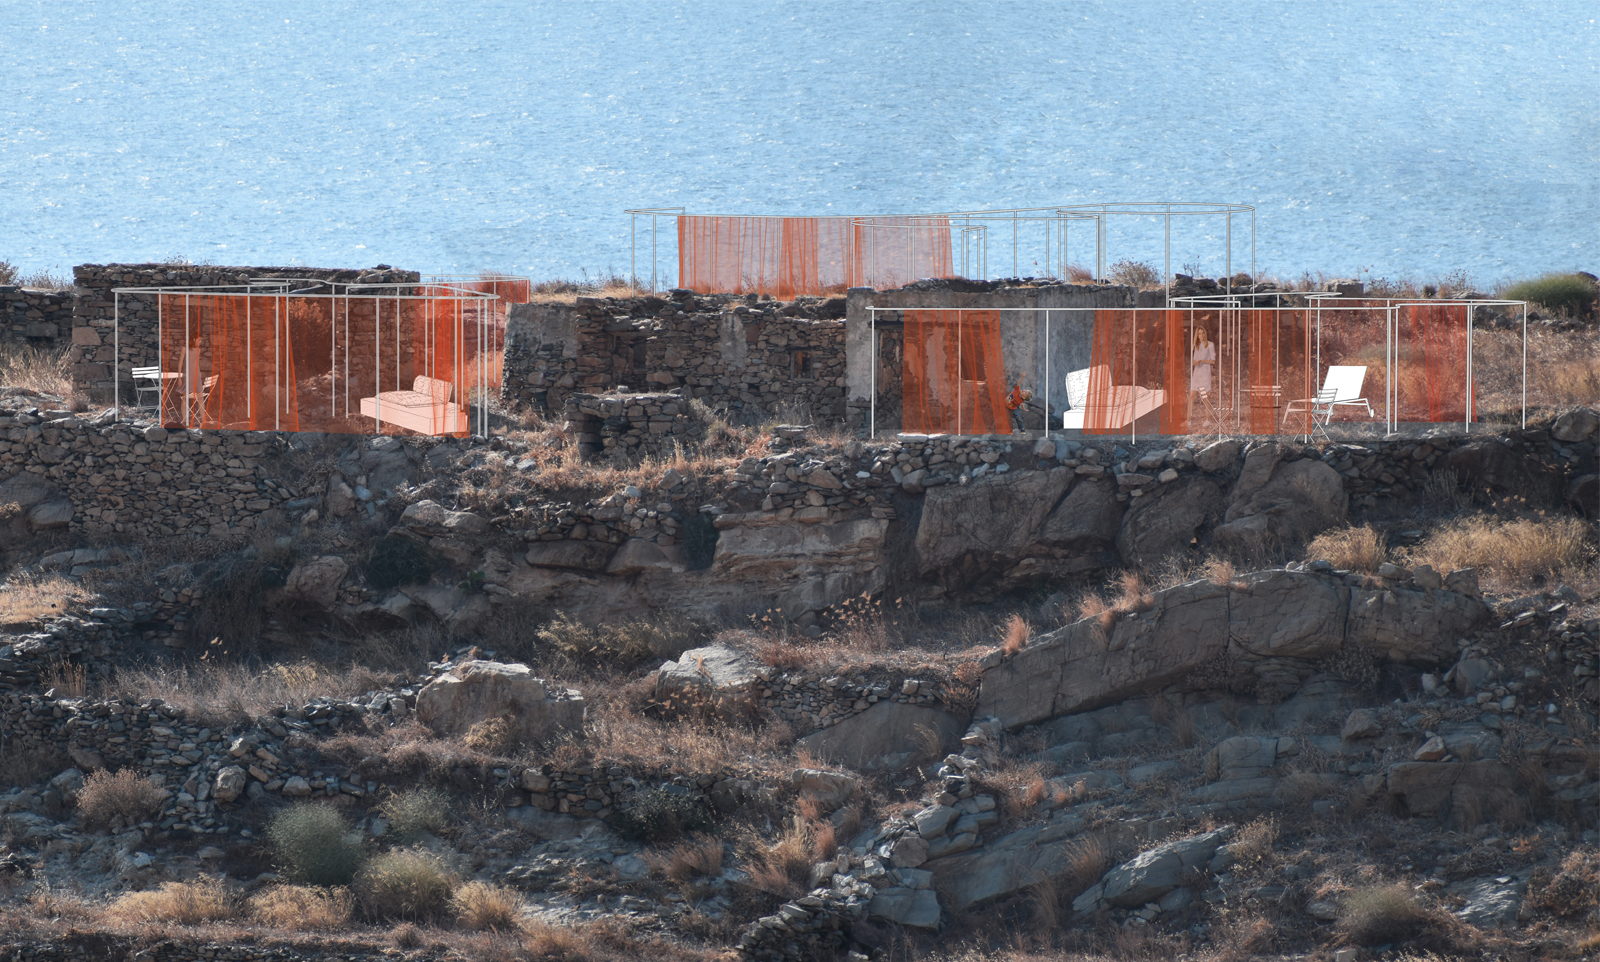 Archisearch Dwelling in Boundaries: Vacation in the ruins of Serifos | Diploma thesis by Maria Magdalini Meimaridou & Charalampos Xypnitos